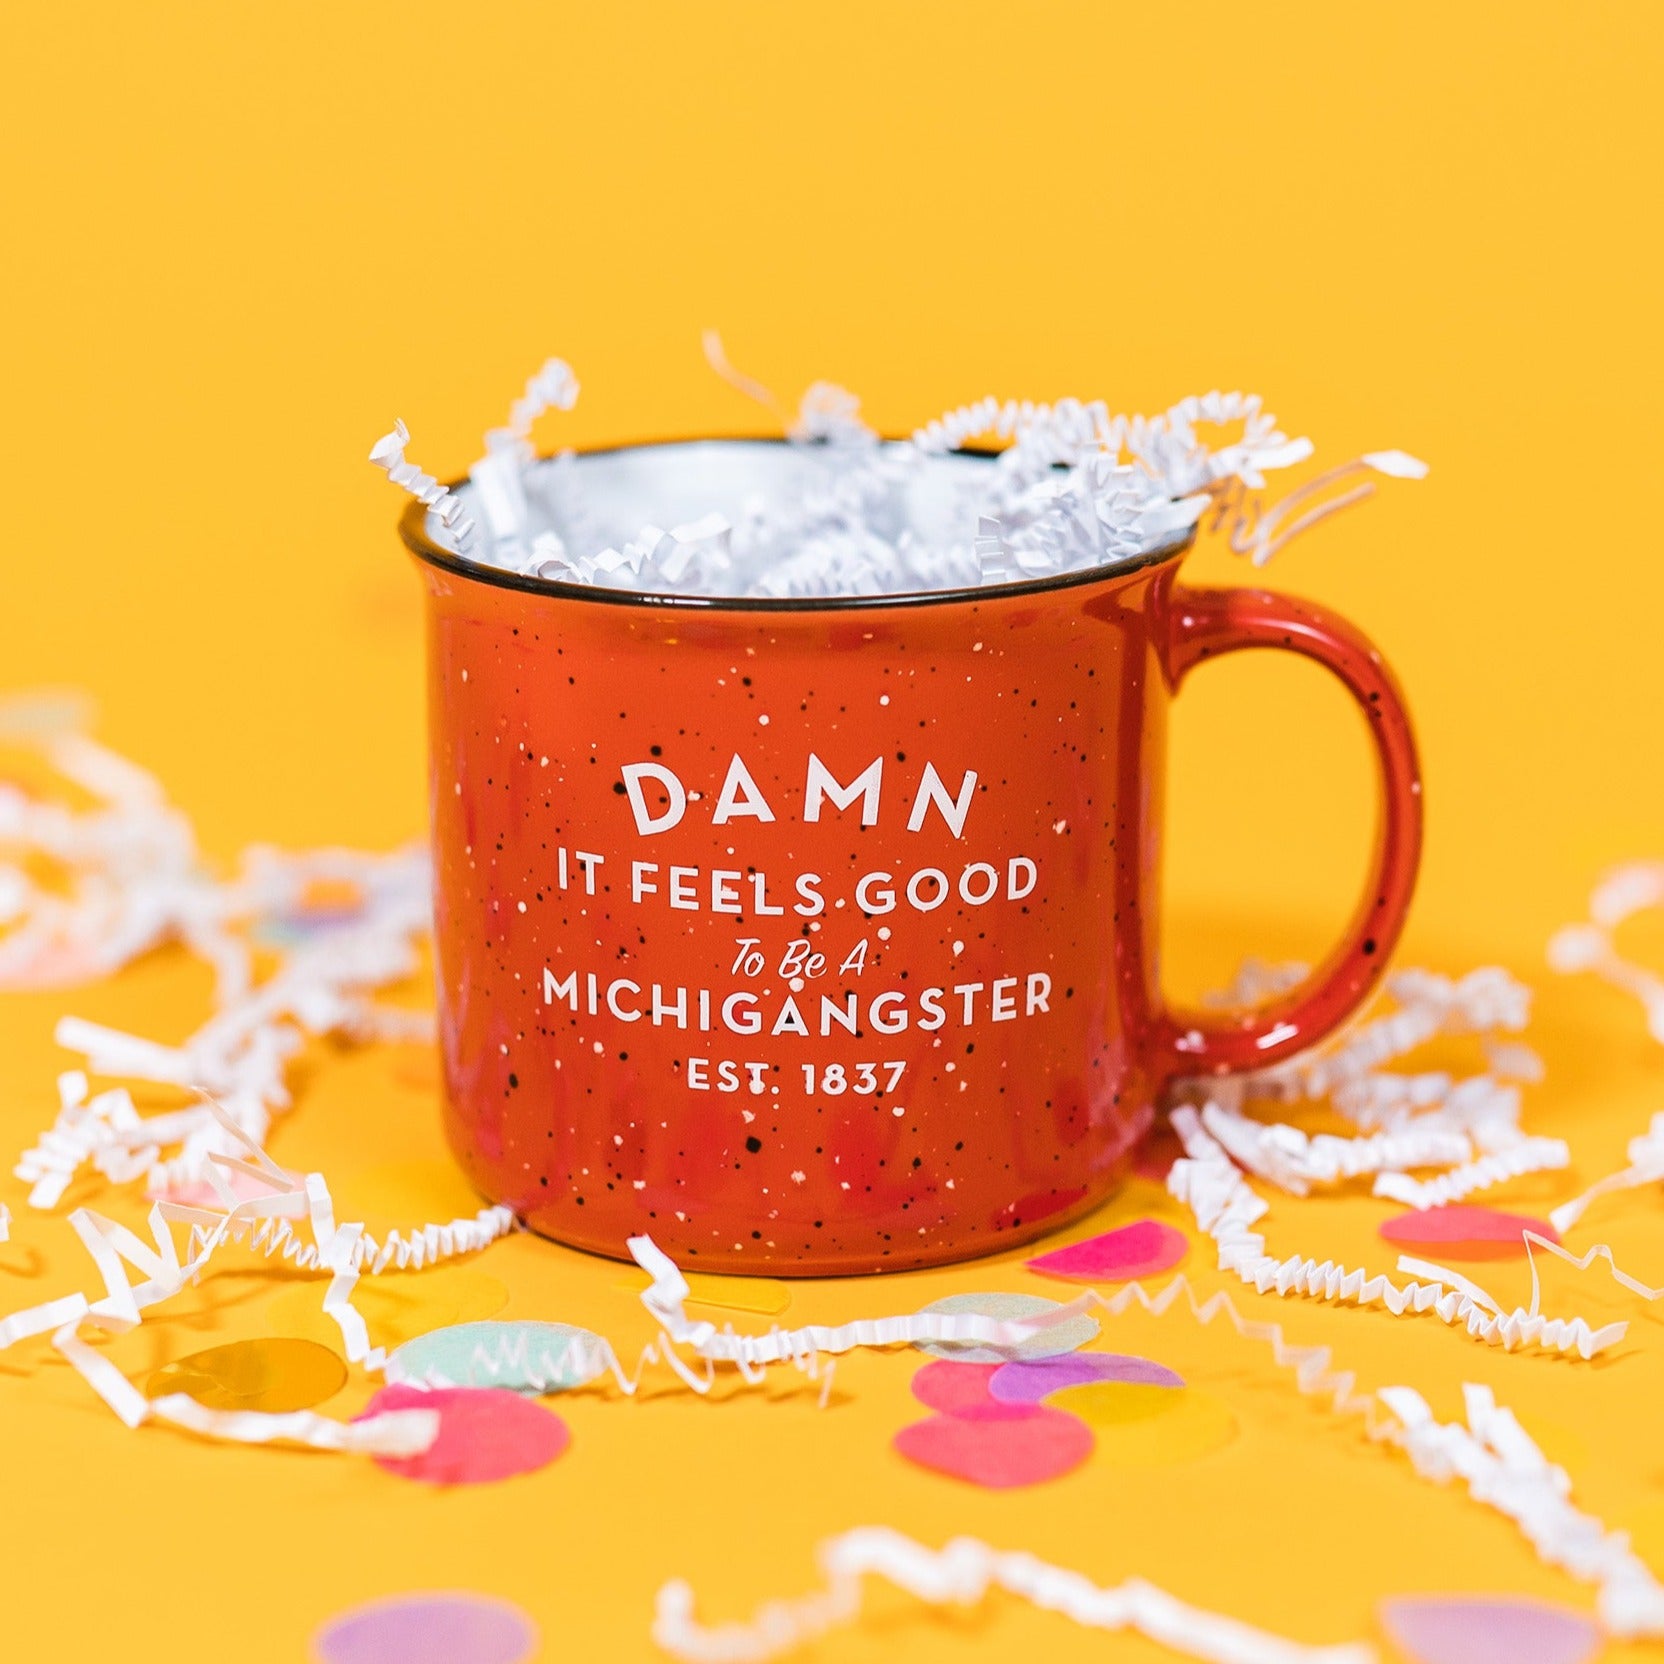 On a sunny mustard background sits a mug with white crinkle and big, colorful confetti scattered around. The red campfire mug has black and white flecks with a black rim and the inside is white. It says "DAMN IT FEELS GOOD To Be A MICHIGANGSTER" and "EST. 1837" in a white, block font. It is filled with white crinkle.